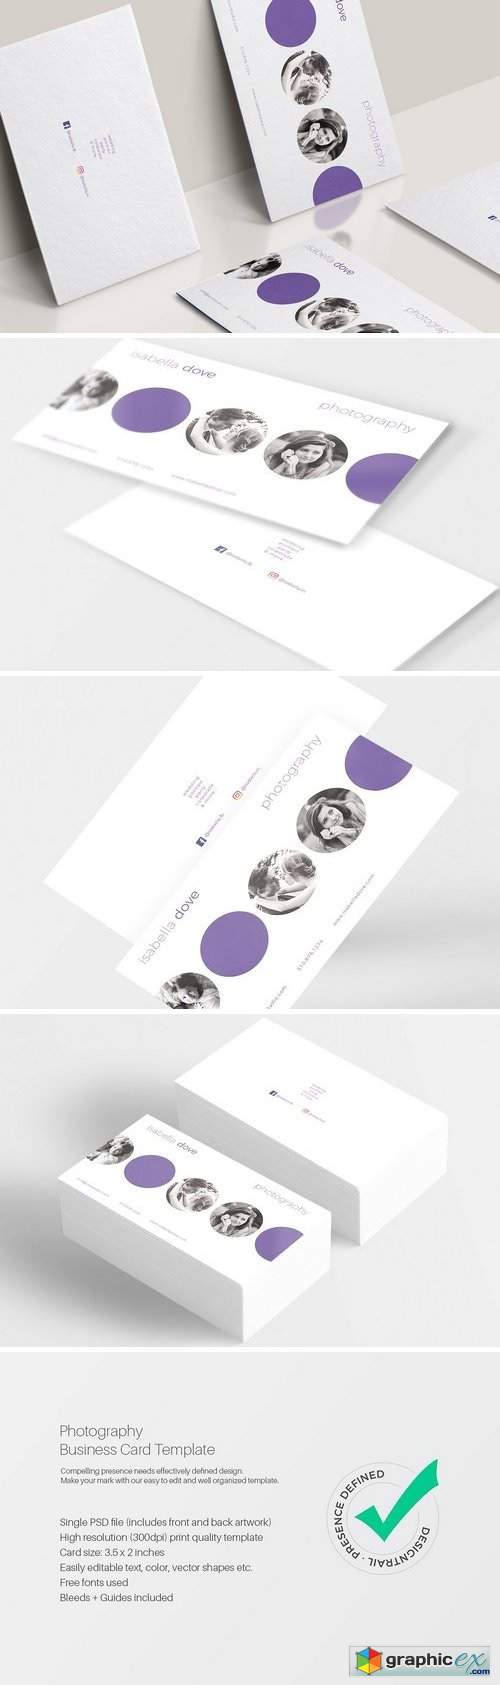 Photography Business Card Template 1569861